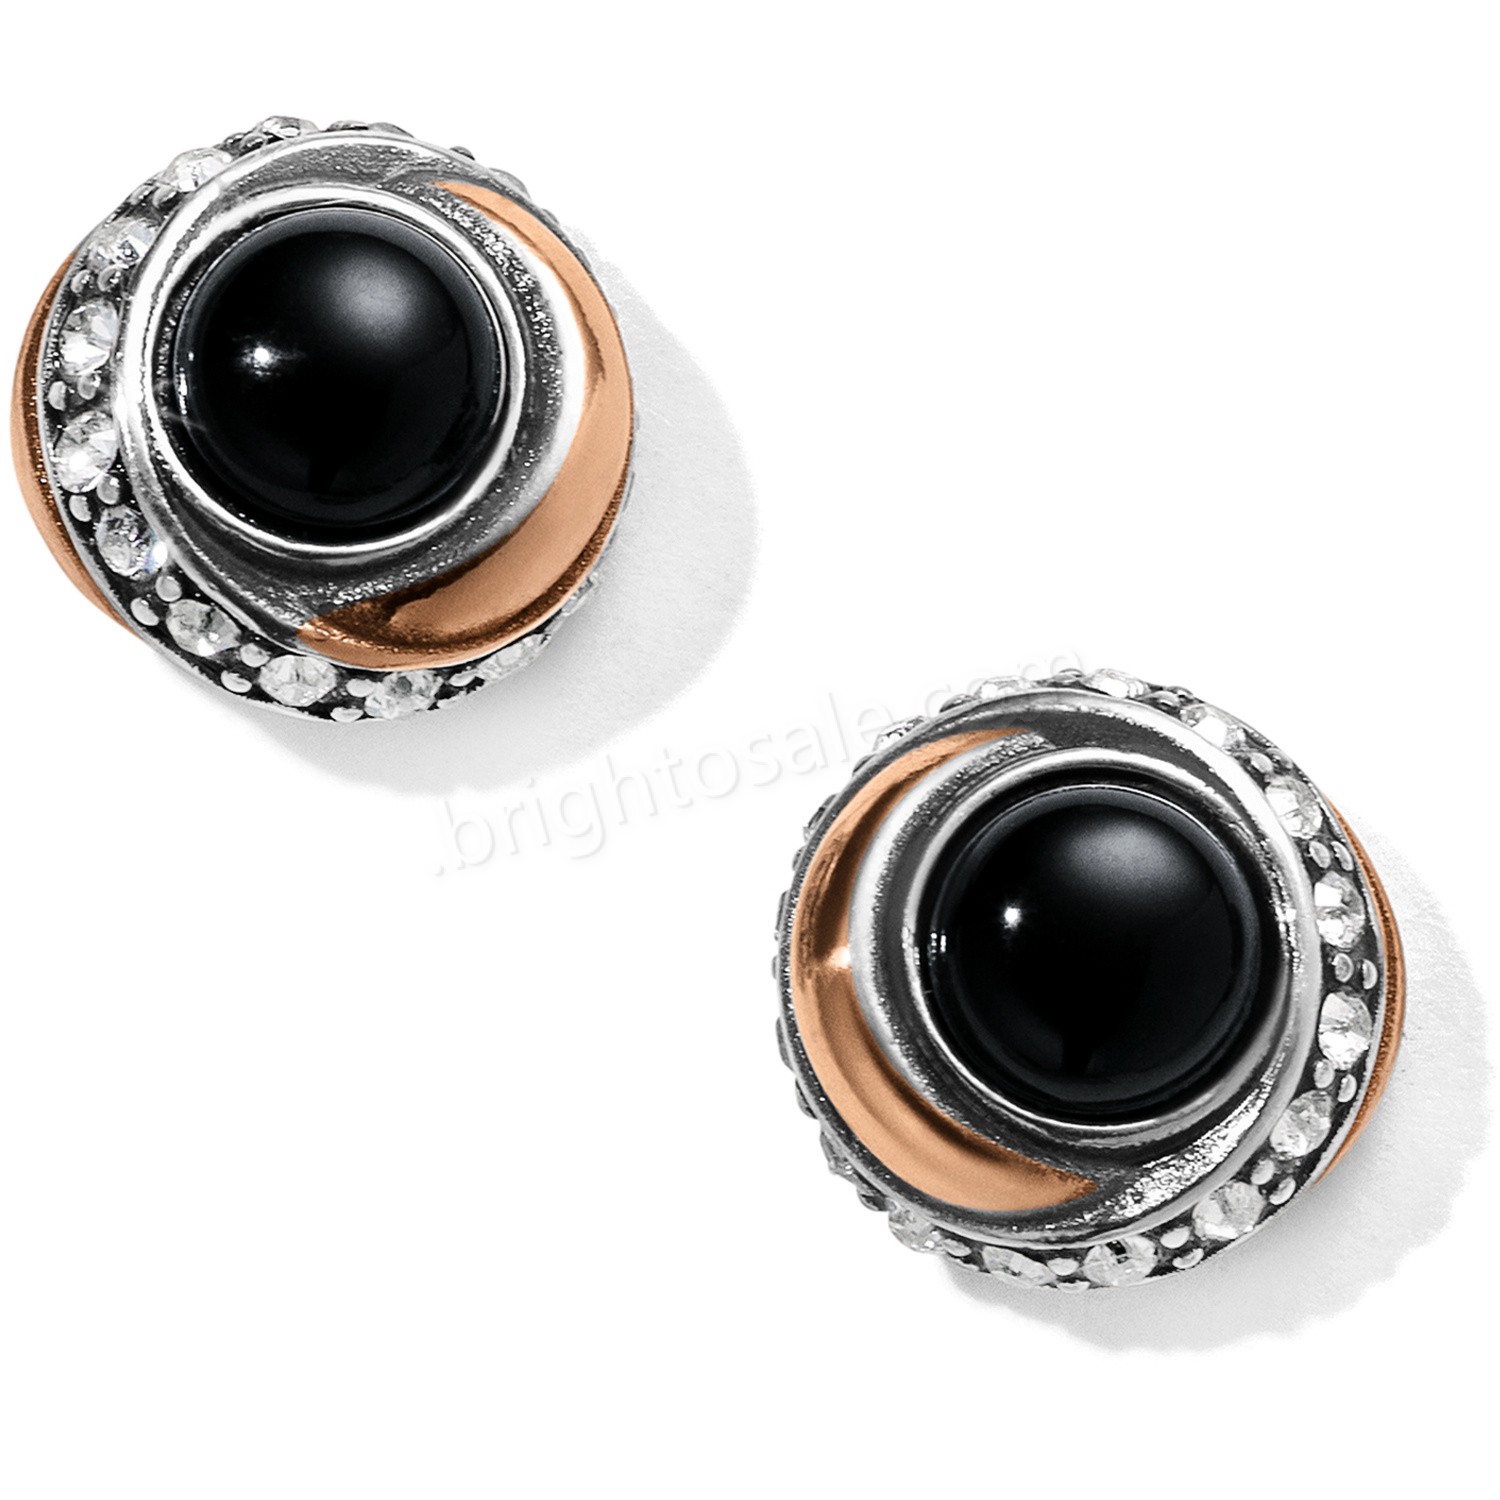 Brighton Collectibles & Online Discount Neptune's Rings Black Agate Button Earrings - Brighton Collectibles & Online Discount Neptune's Rings Black Agate Button Earrings